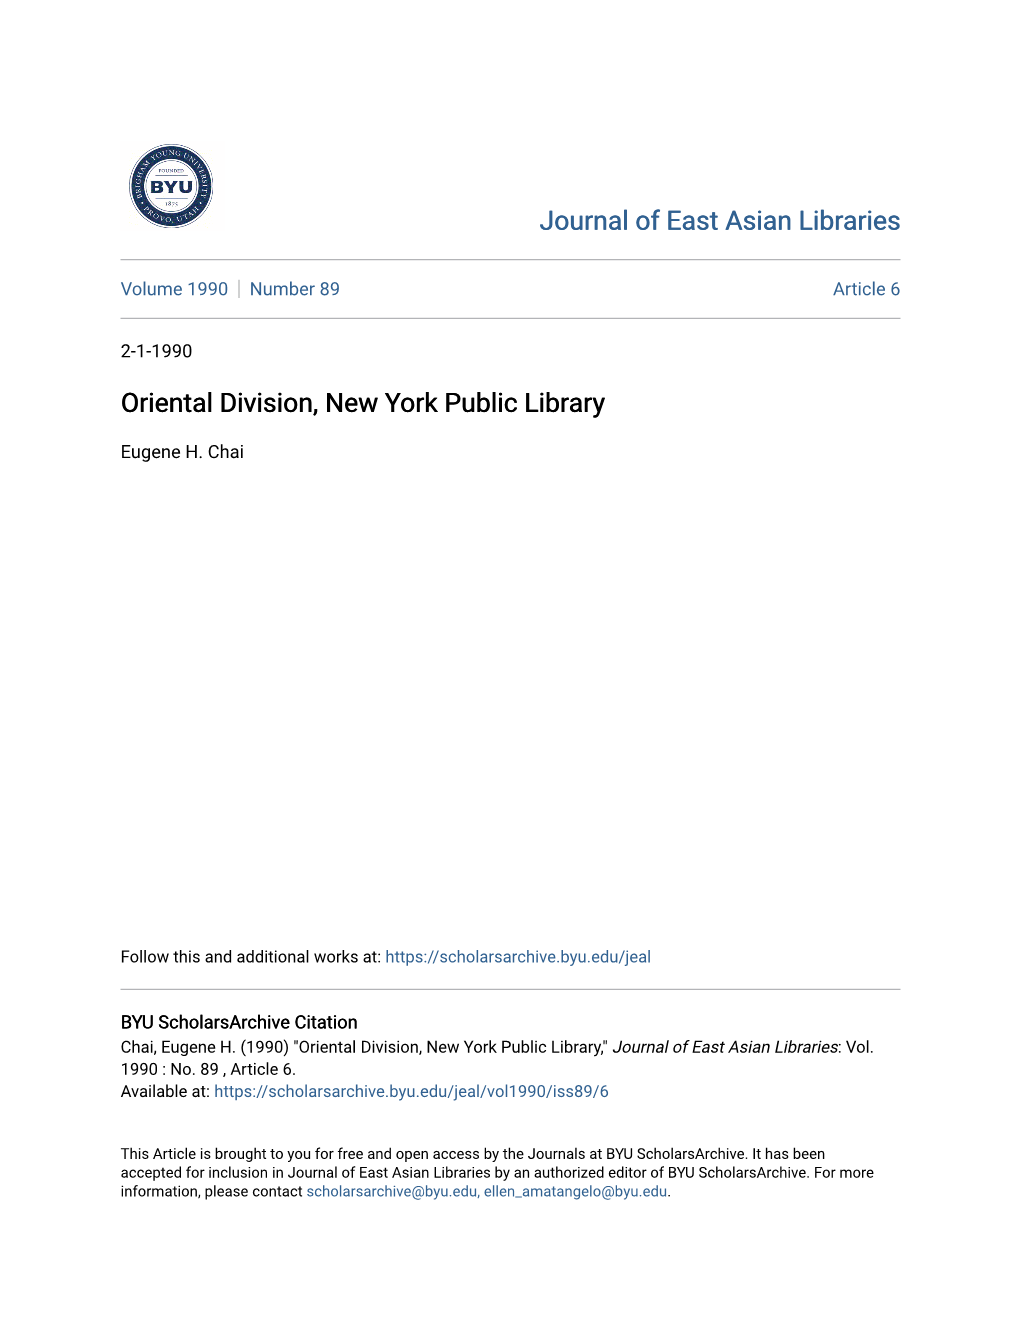 Oriental Division, New York Public Library